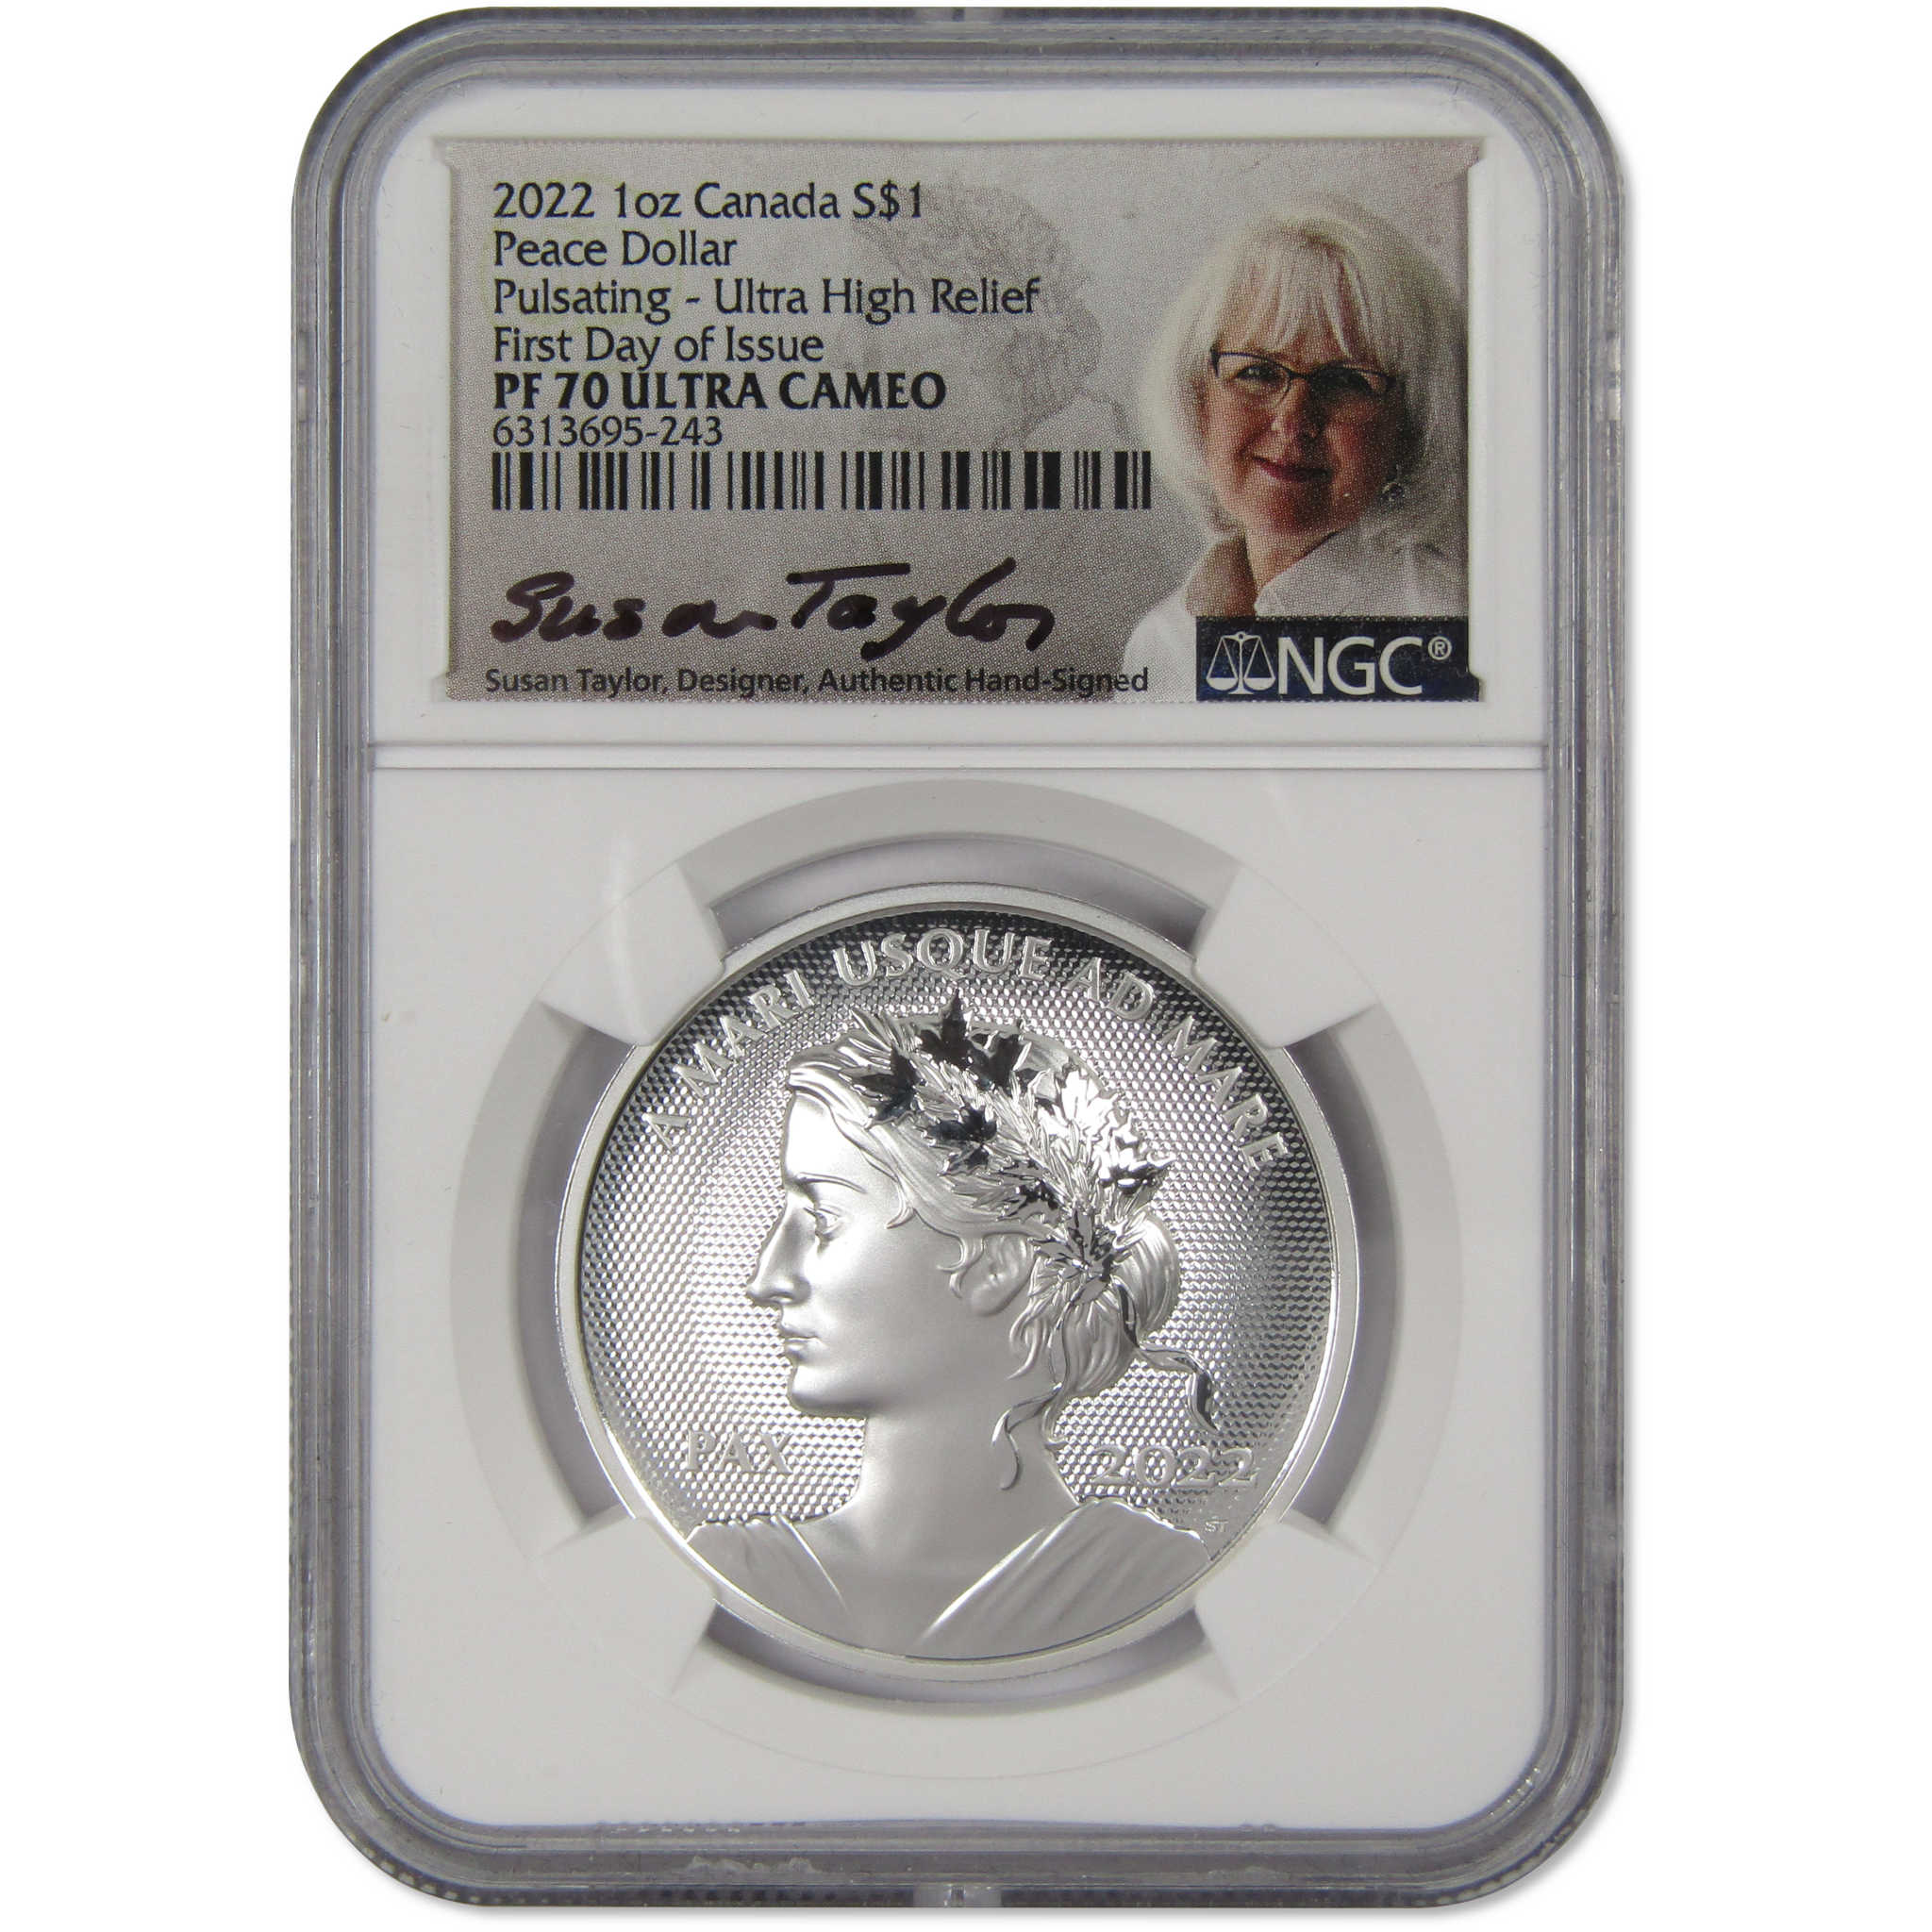 2022 Canadian Peace Dollar PF 70 UCAM NGC Silver First Day SKU:CPC2977